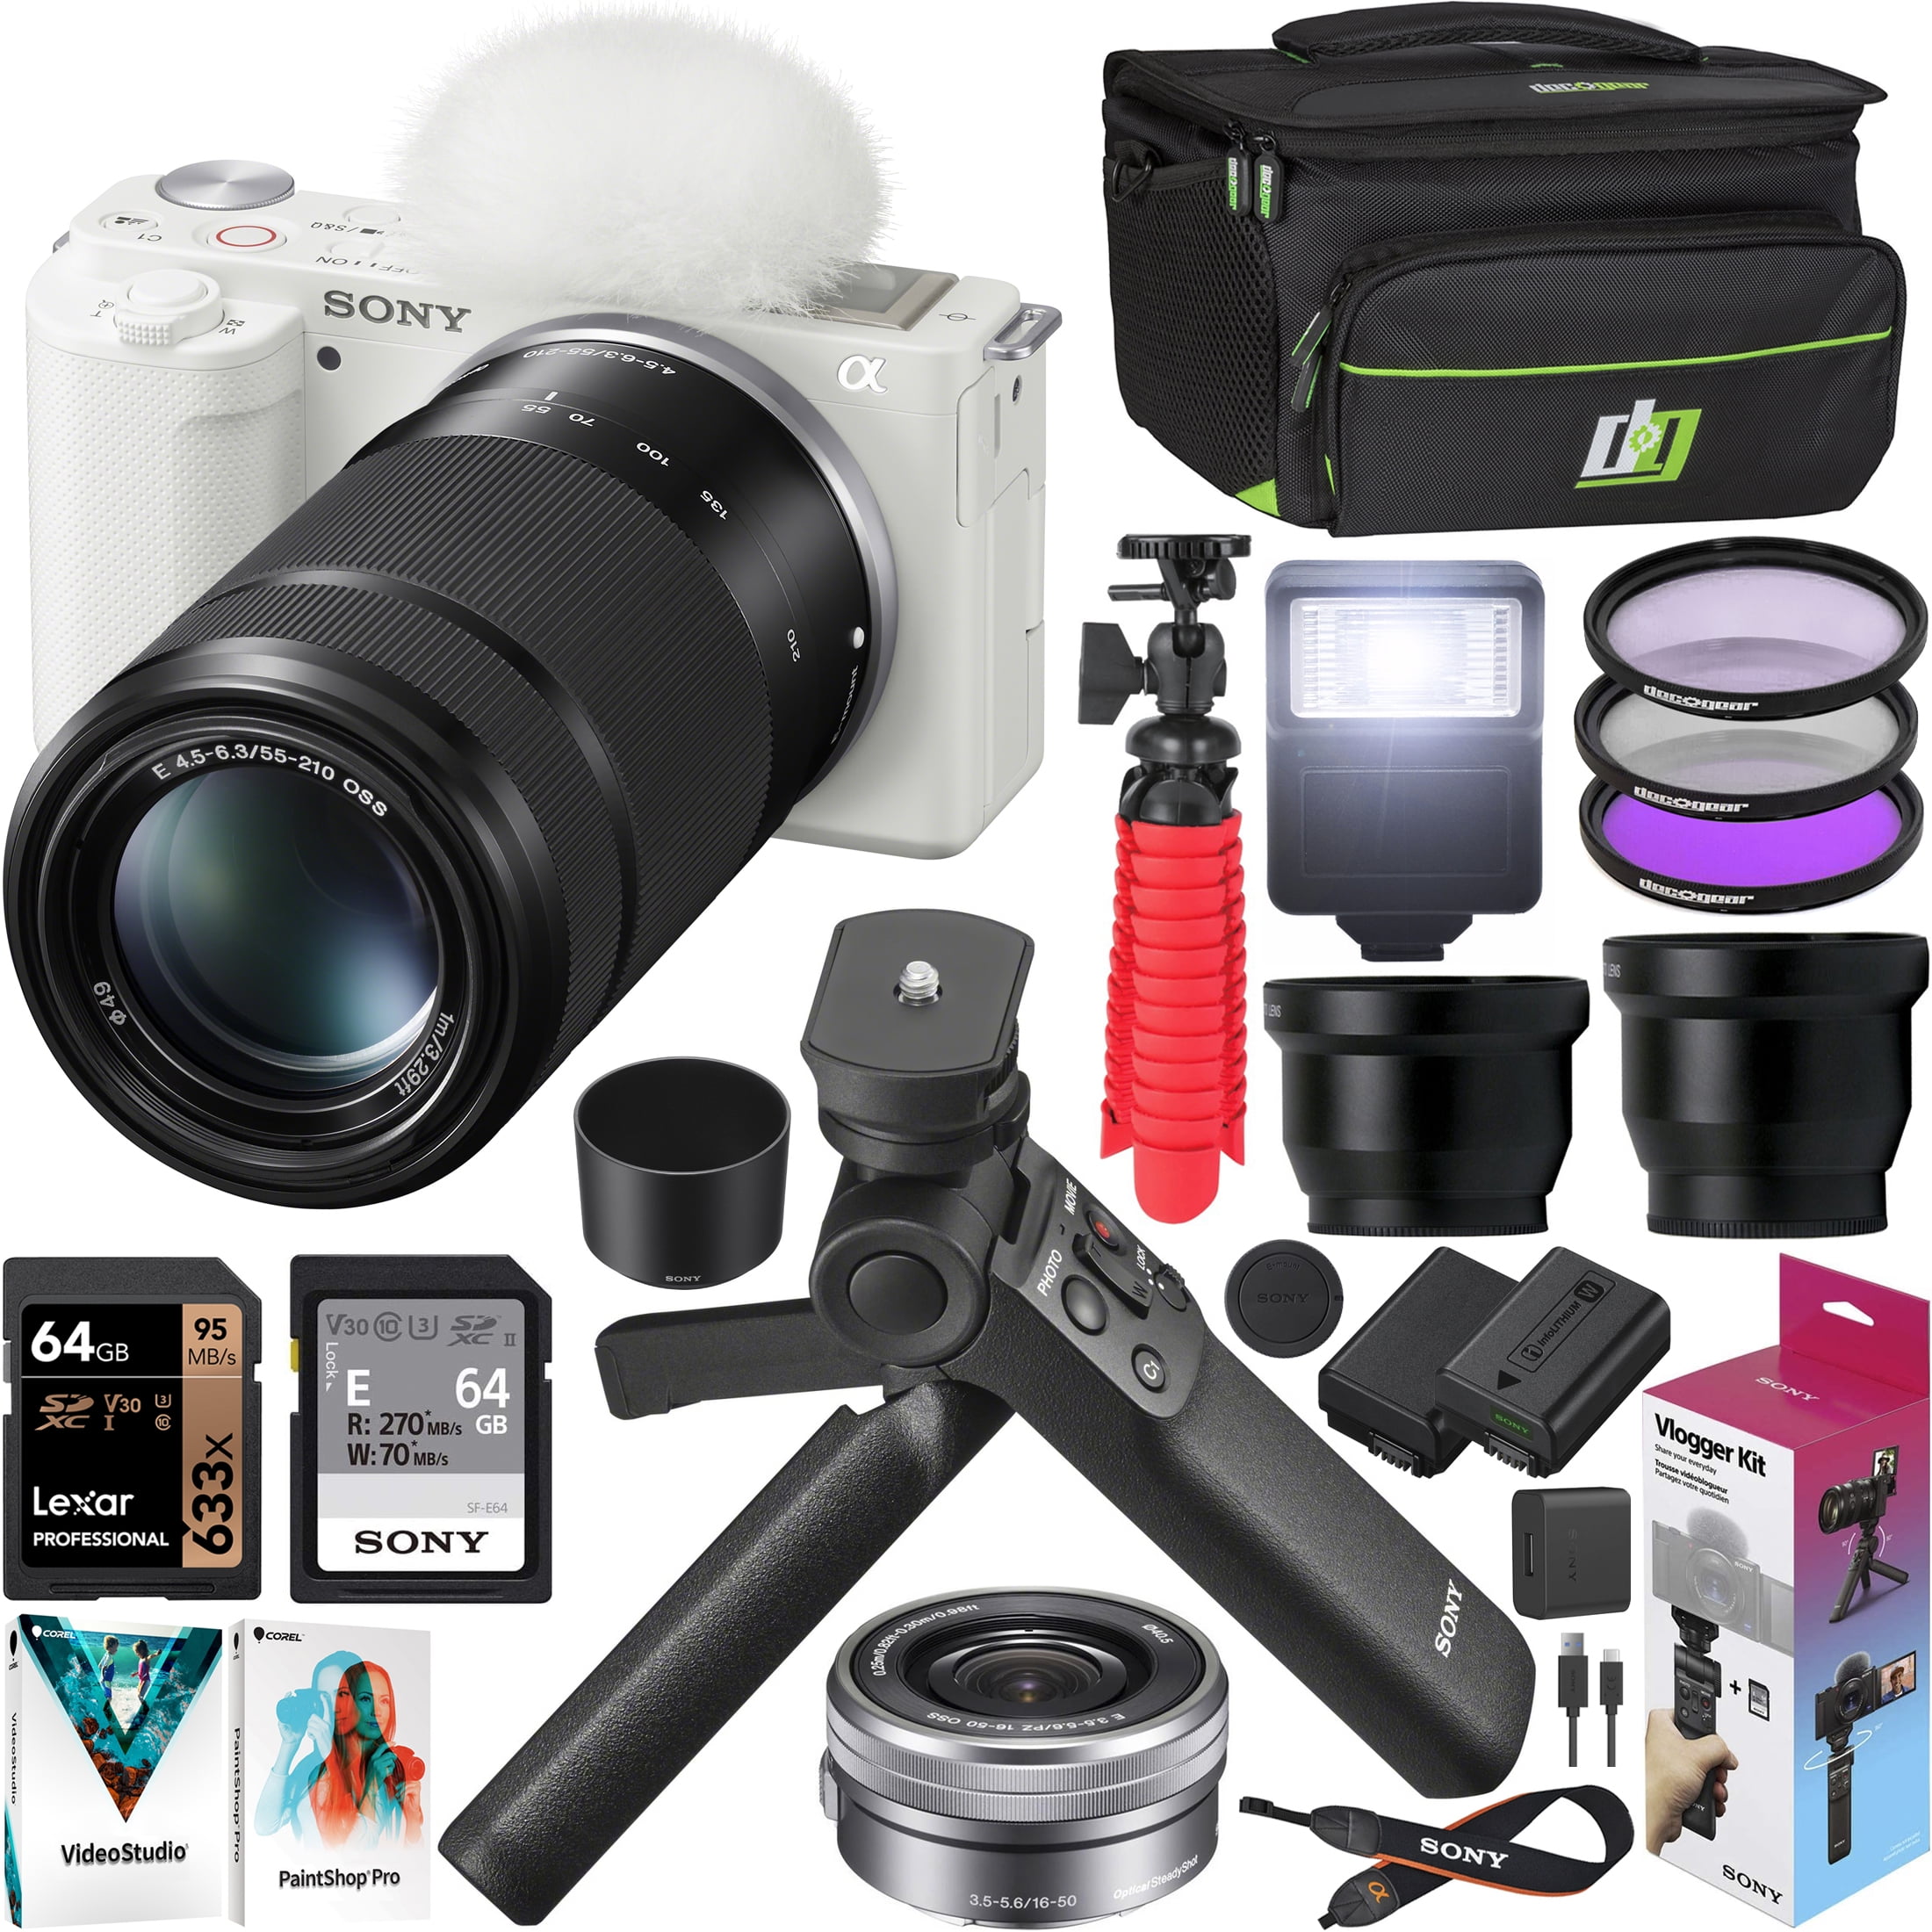 Wide & Telephoto Lenses Deco Gear Case & Accessories Filters Sony ZV-E10 Mirrorless Camera 2 Lens Vlogger Kit 16-50mm 55-210mm ILCZV-E10L/B Black Bundle with ACCVC1 Including GP-VPT2BT Grip